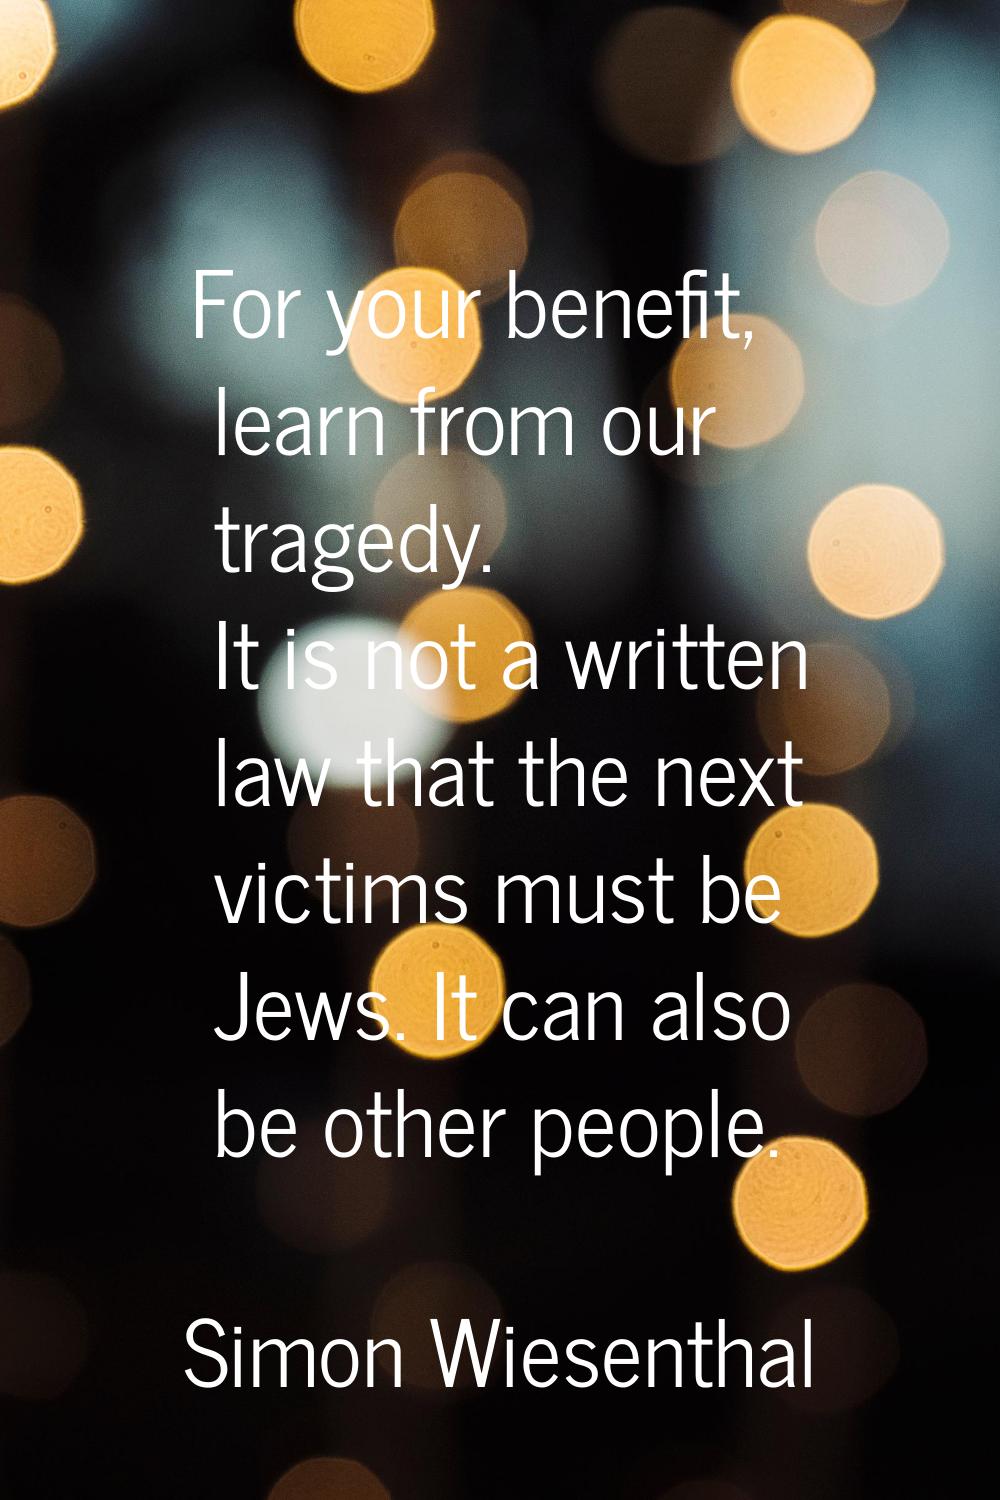 For your benefit, learn from our tragedy. It is not a written law that the next victims must be Jew